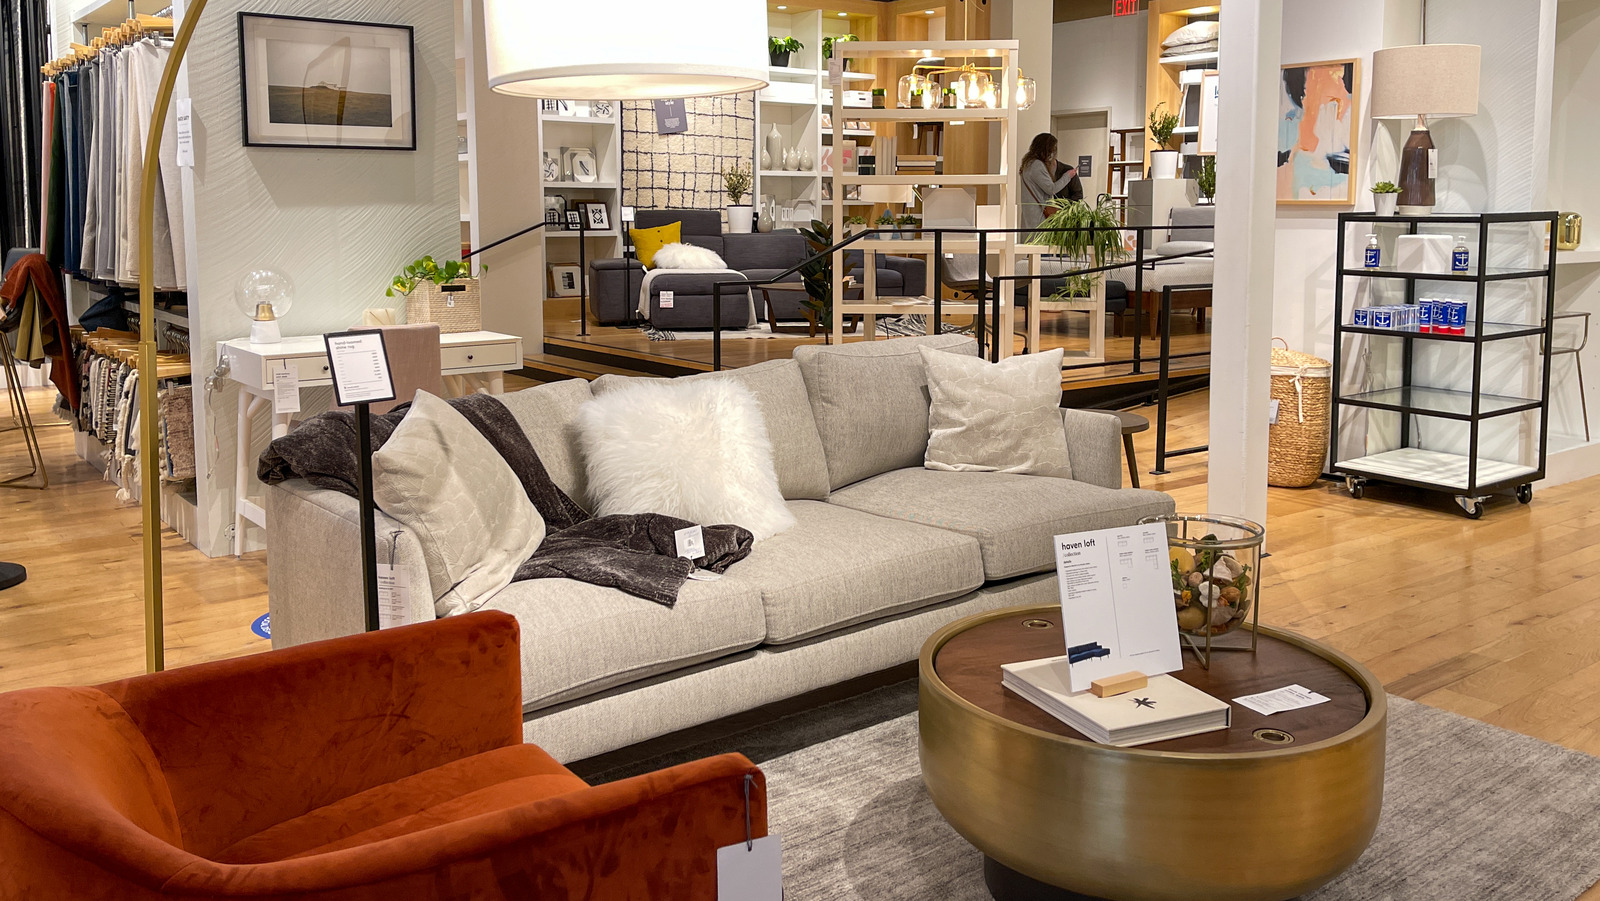 Secrets About West Elm That Only Savvy Shoppers Know